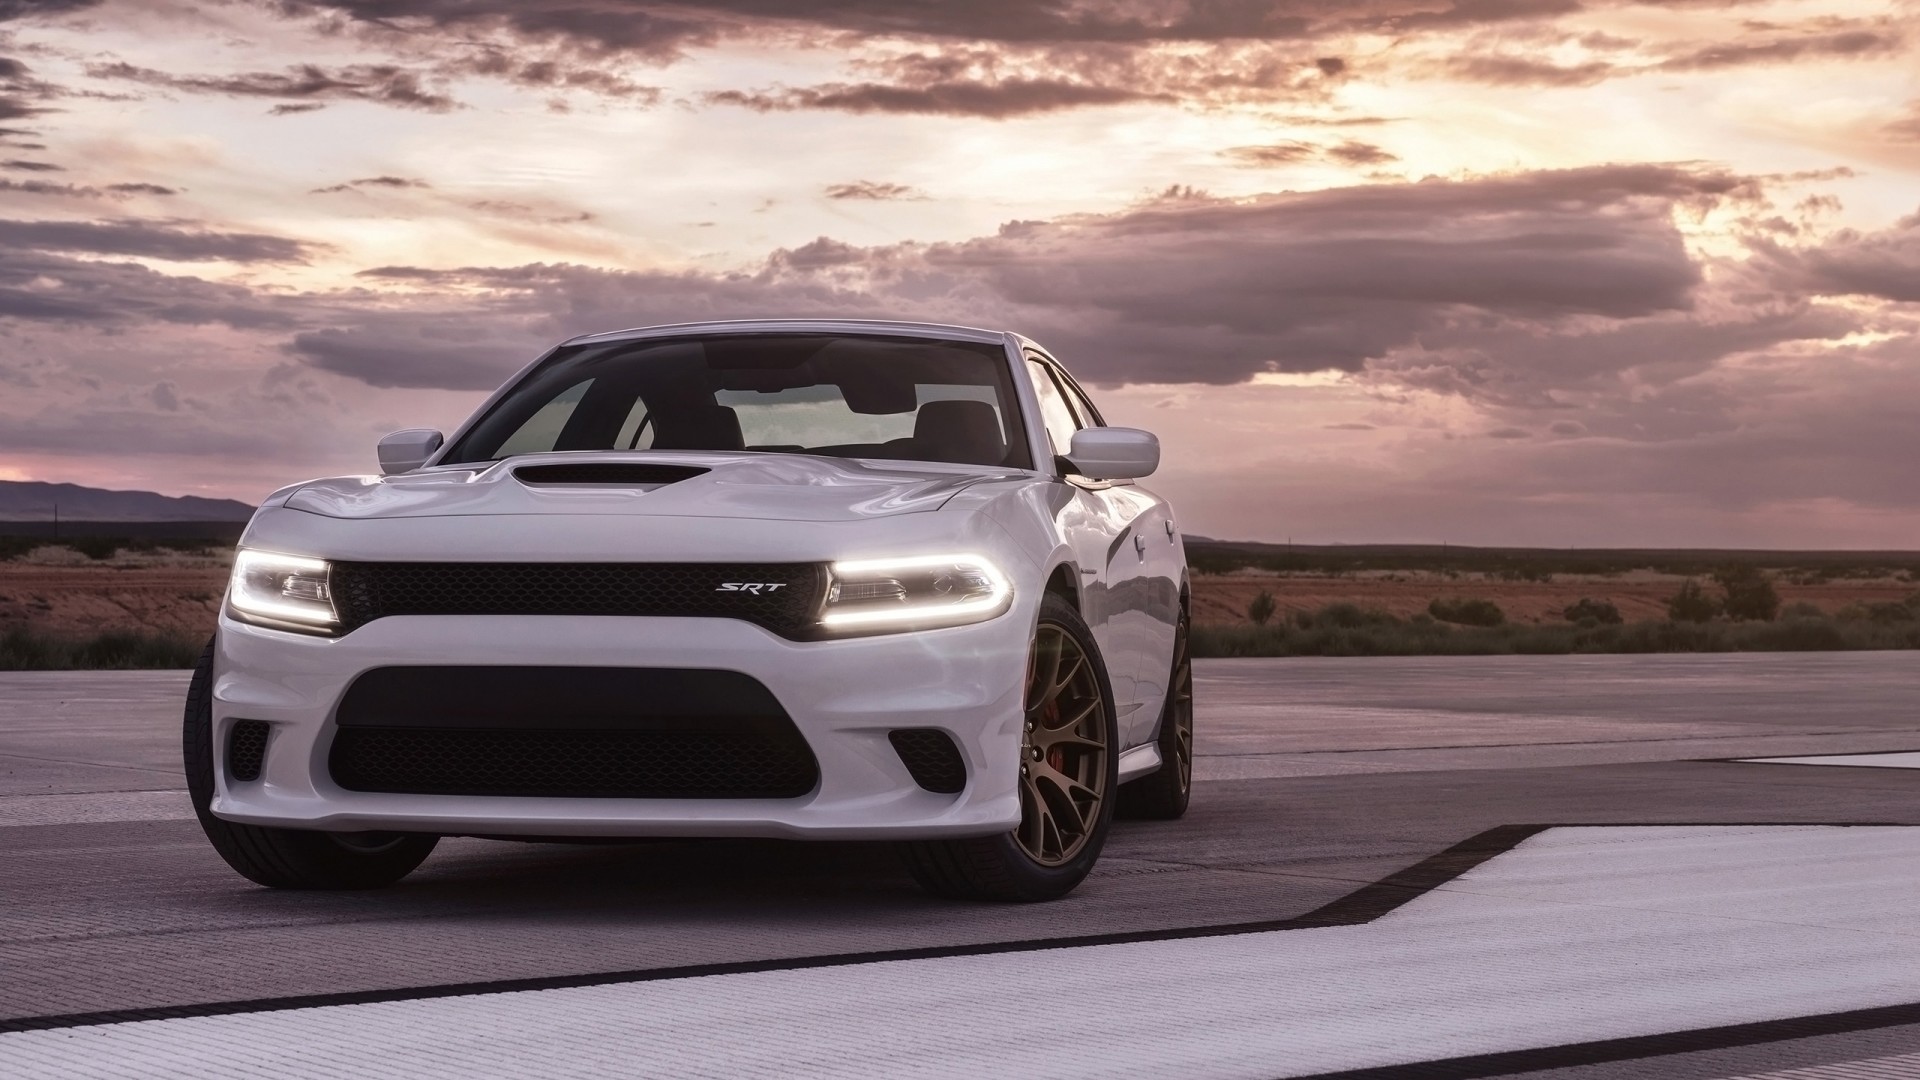 1920x1080, Dodge Charger Wallpapers - Dodge Charger 2016 Used Price - HD Wallpaper 